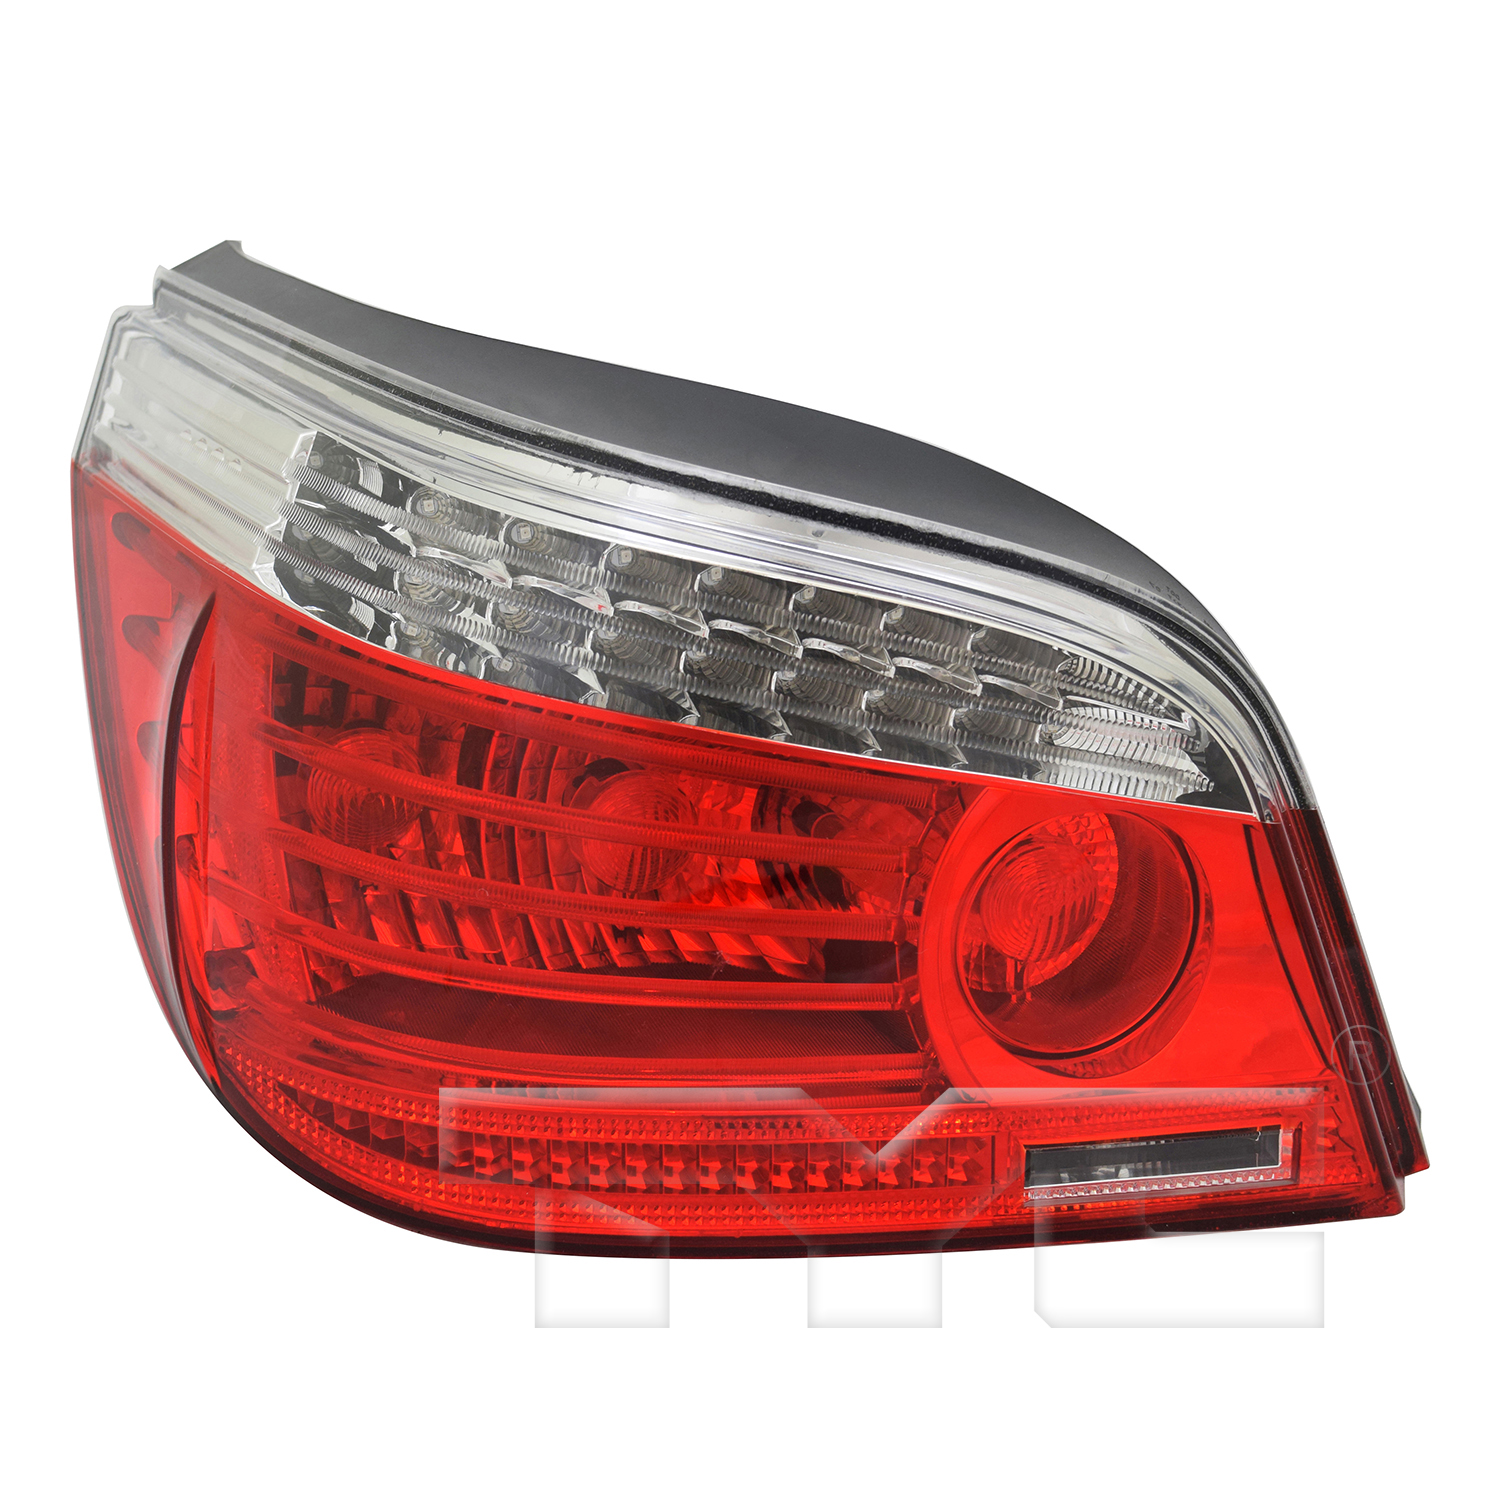 Aftermarket TAILLIGHTS for BMW - 535I, 535i,08-10,LT Taillamp assy